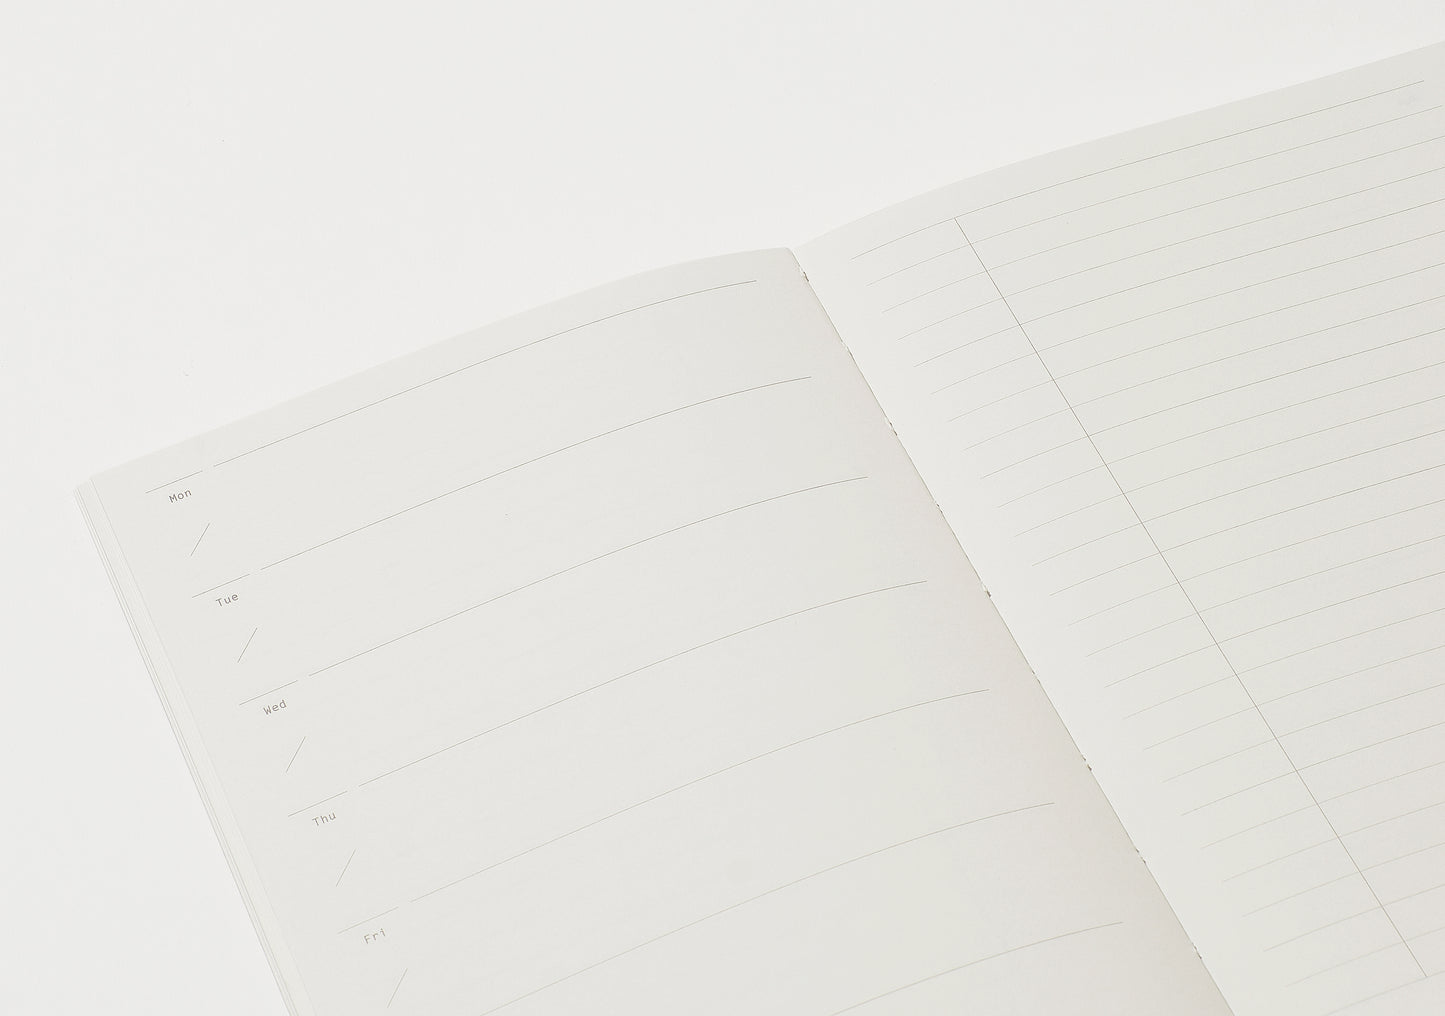 Plain Note 302 - FREE PLANNER